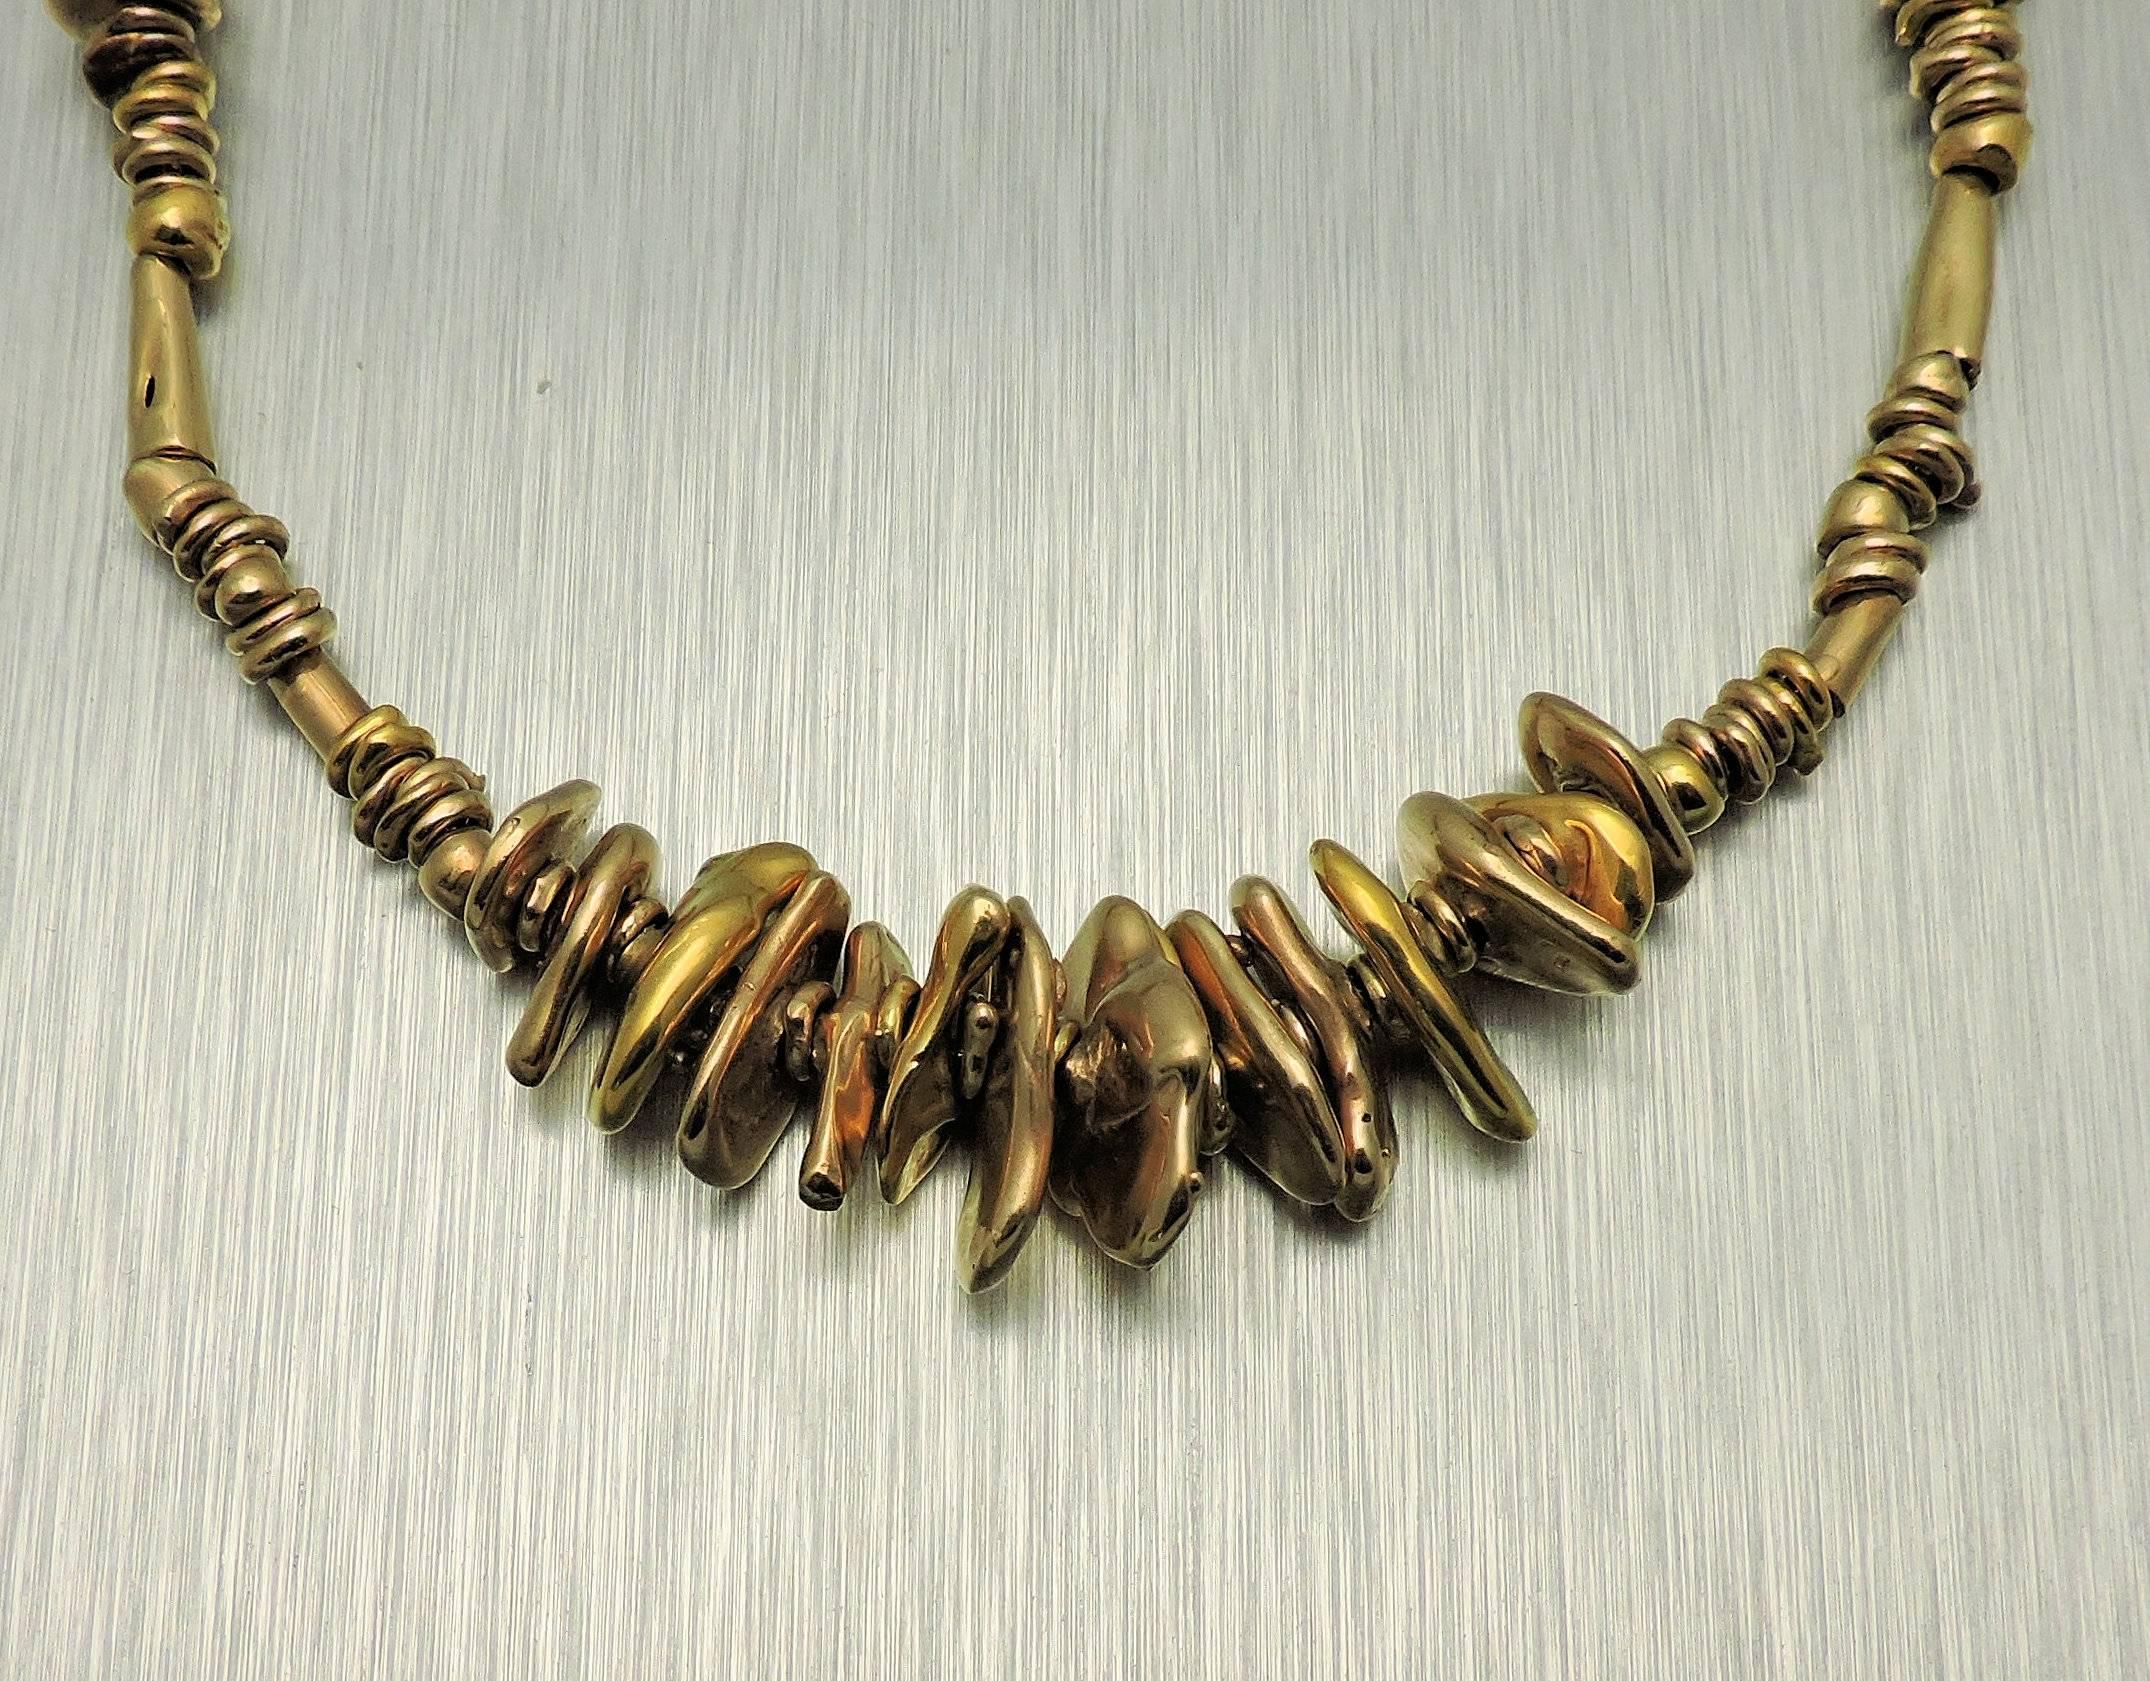 14K yellow gold, one-of-a-kind necklace made by noted Texas artist, Velma Davis Dozier, exhibited in 1964 and published.  This piece is a series of flattened free-form discs separated by spirals and tubed of gold.  Mrs. Dozier was a Dallas